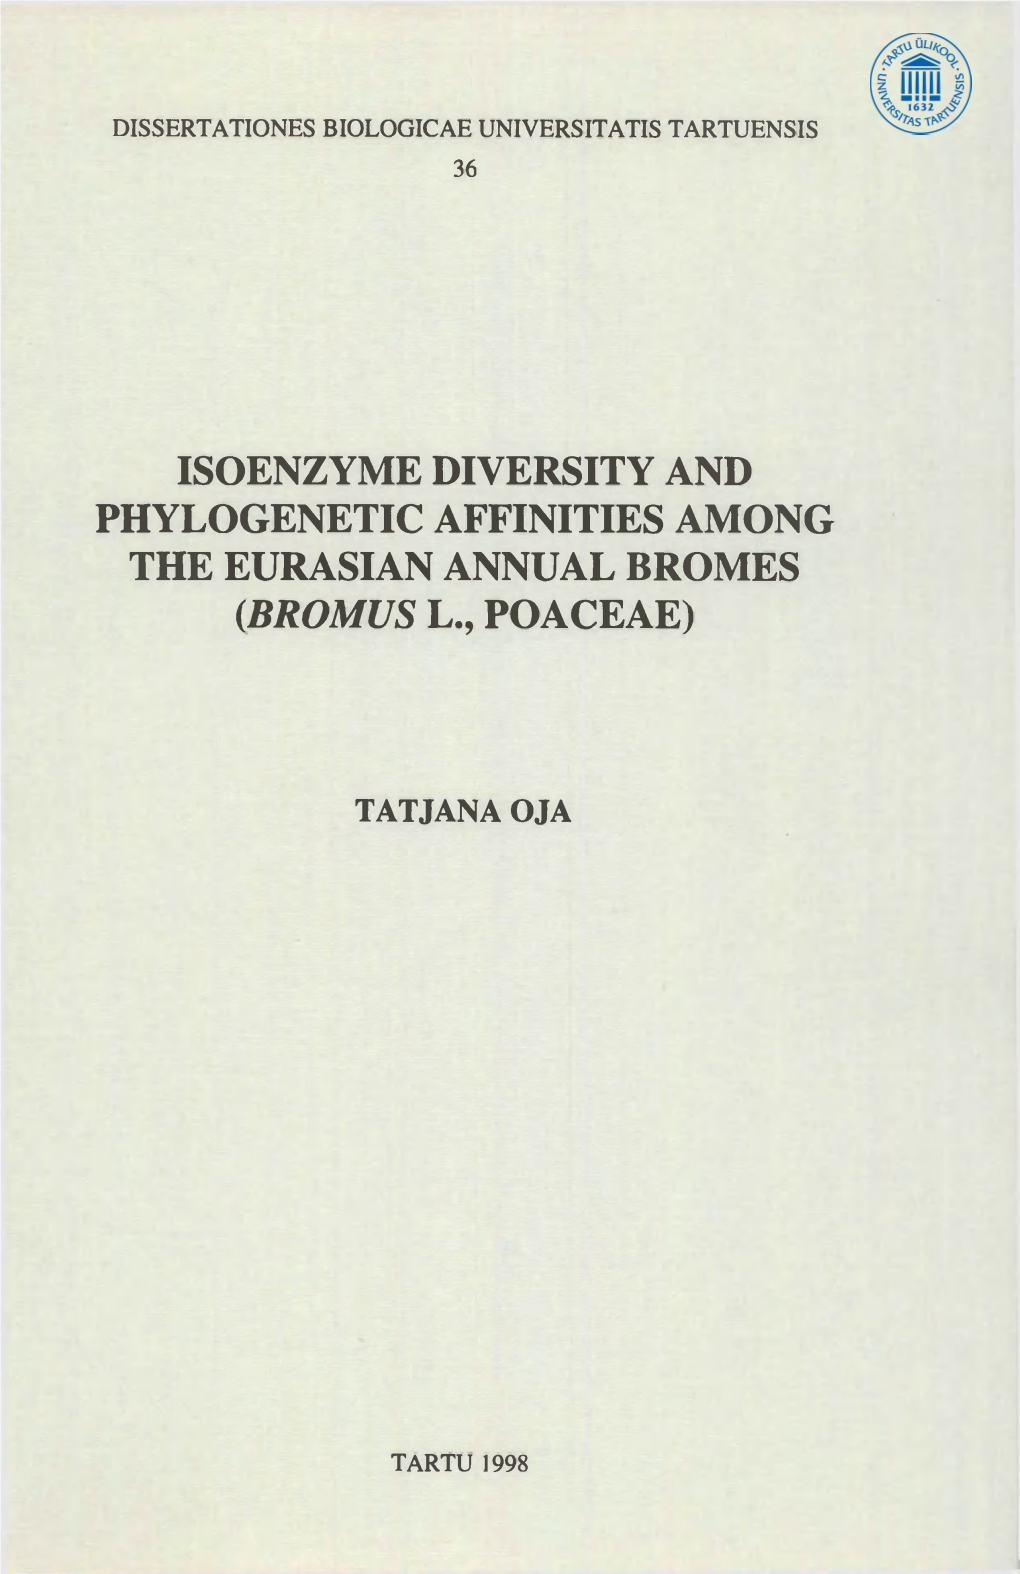 Isoenzyme Diversity and Phylogenetic Affinities Among the Eurasian Annual Bromes (Bromus L., Poaceae)